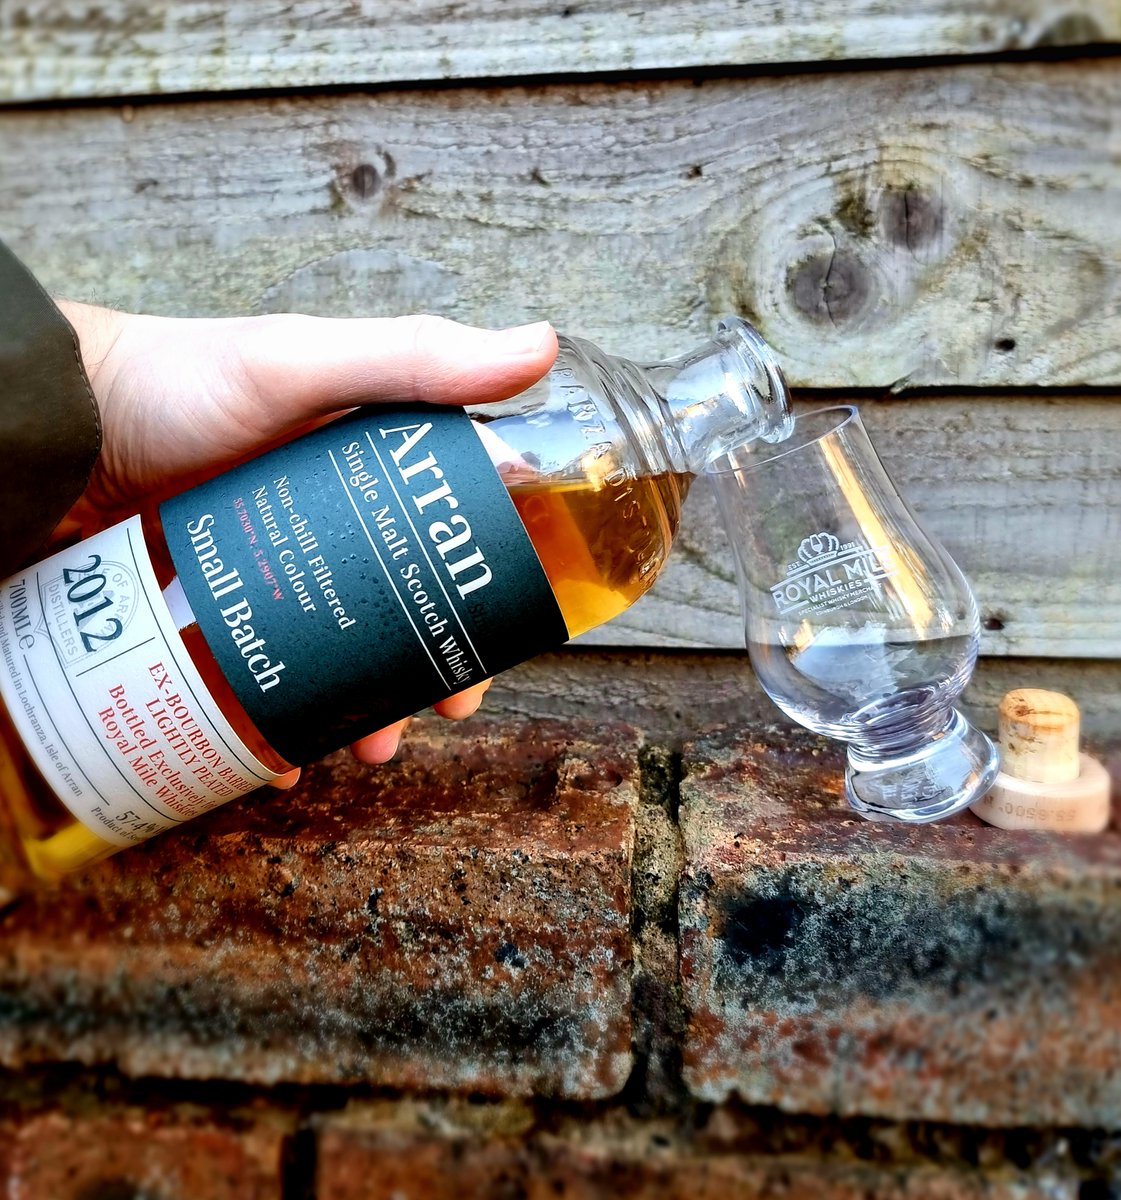 New: Our own exclusive medium peated @Arranwhisky Small Batch 2012. On the palate we found notes of charred smoke, crème brulee and lemon tart. We are delighted with this combination of three 1st fill Bourbon casks. Find out more here: royalmilewhiskies.com/arran-2012-sma…